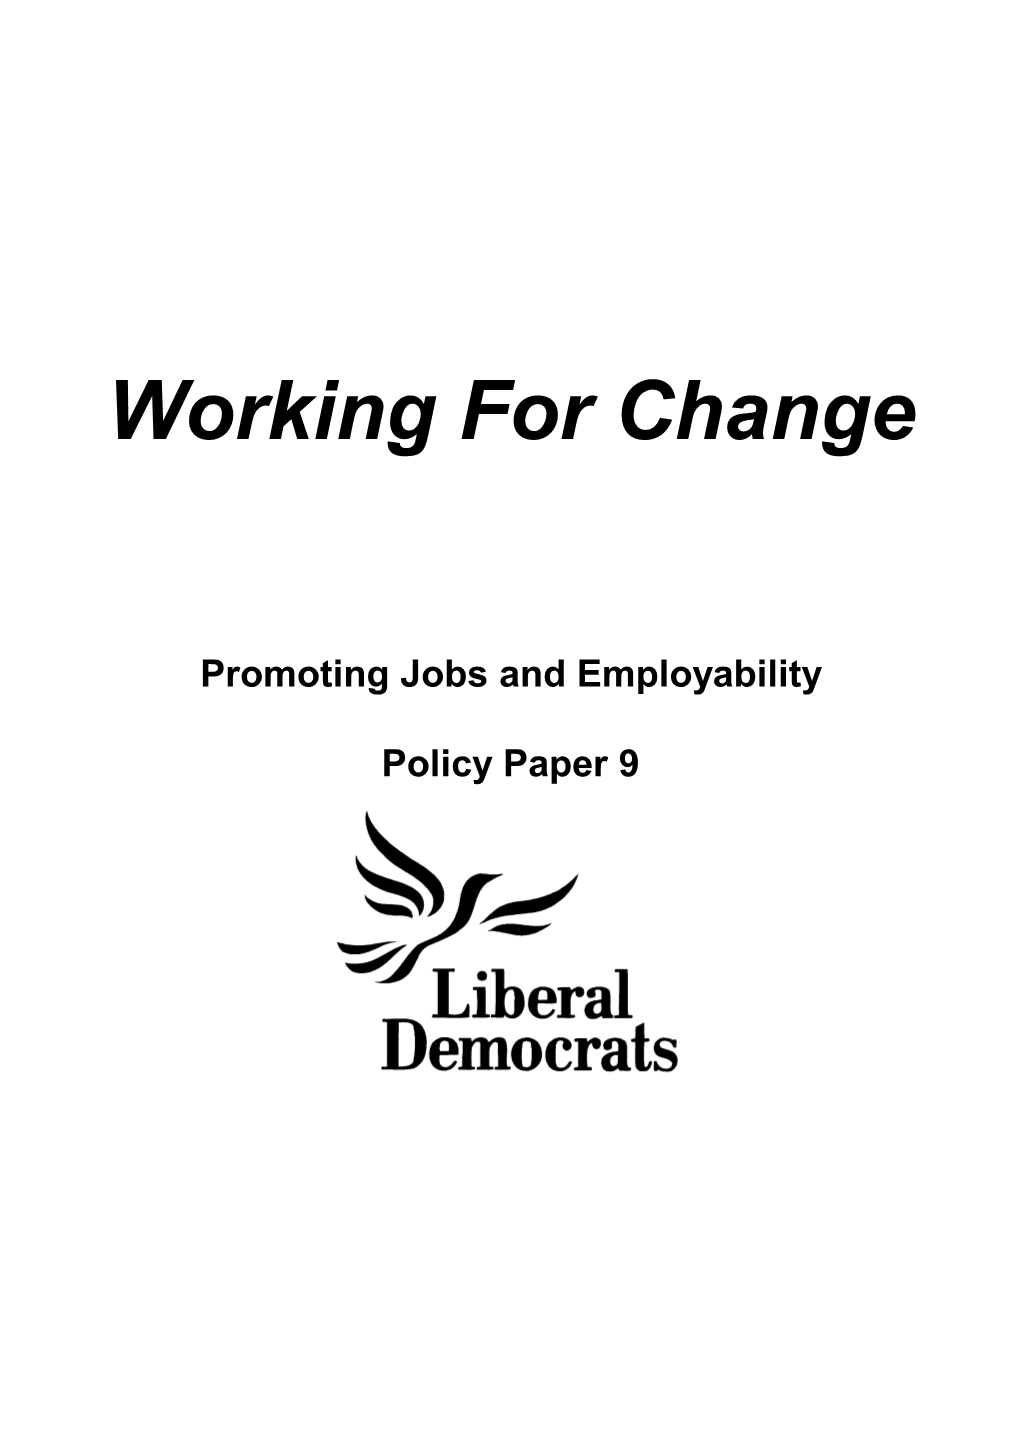 9. Working for Change